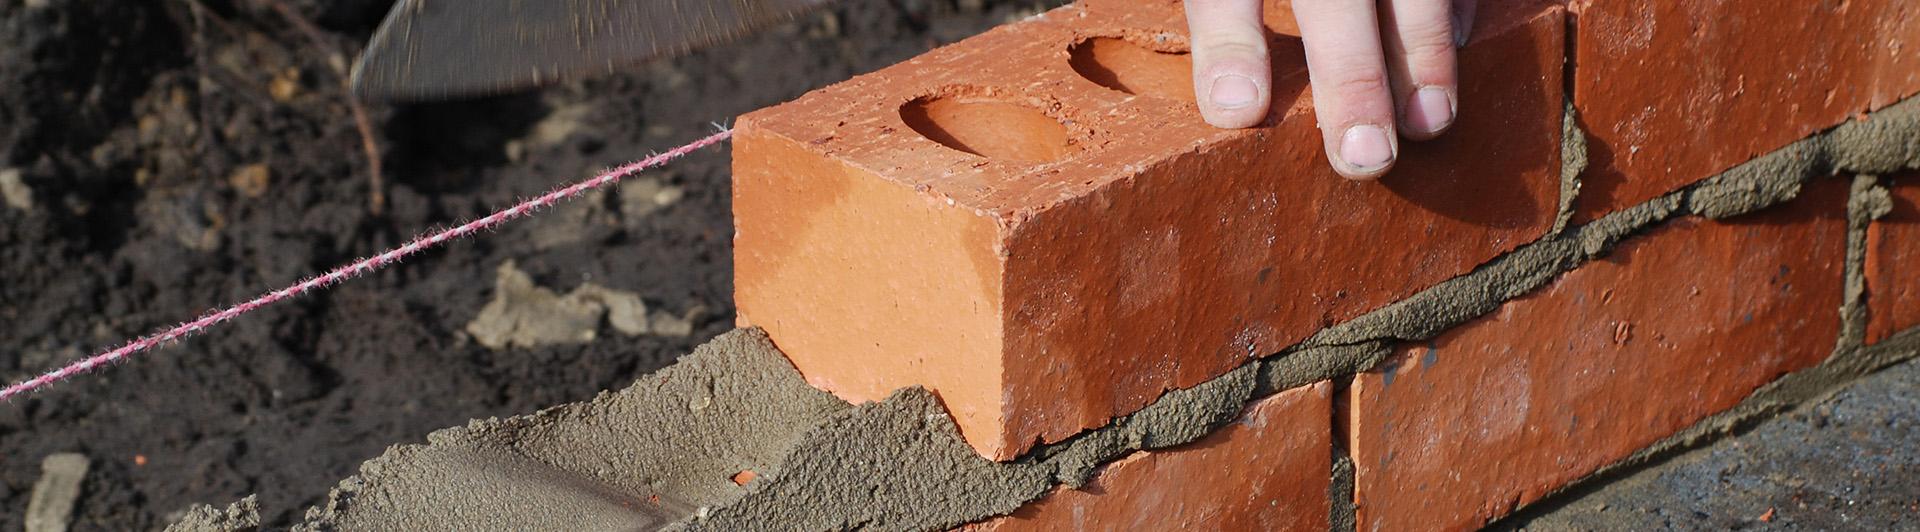 Hand Piling Clay Paver